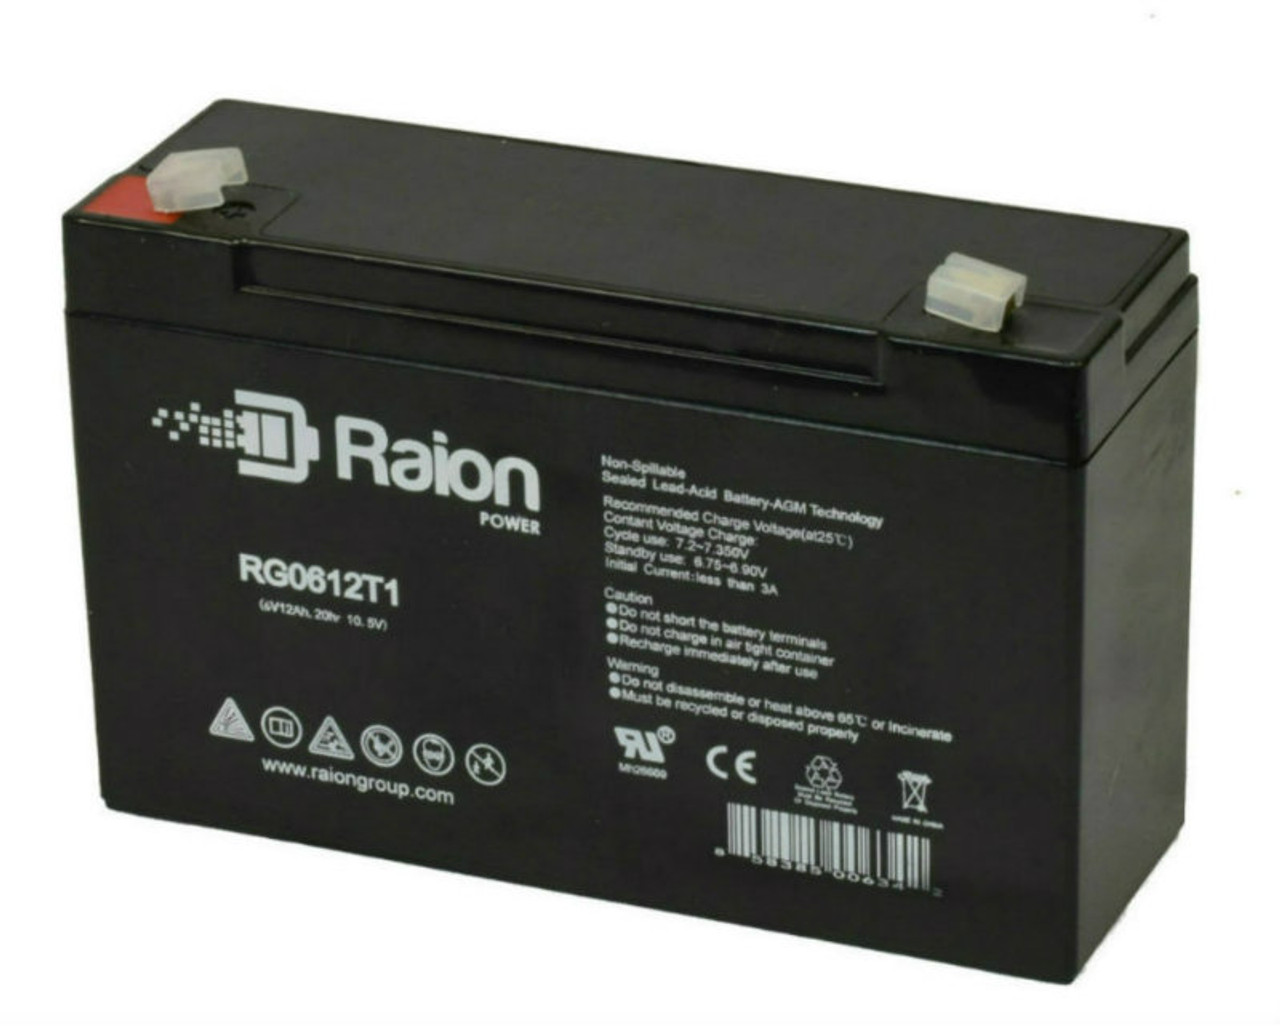 Raion Power RG06120T1 Replacement 6V 12Ah Emergency Light Battery for Chloride TD2MF50ID